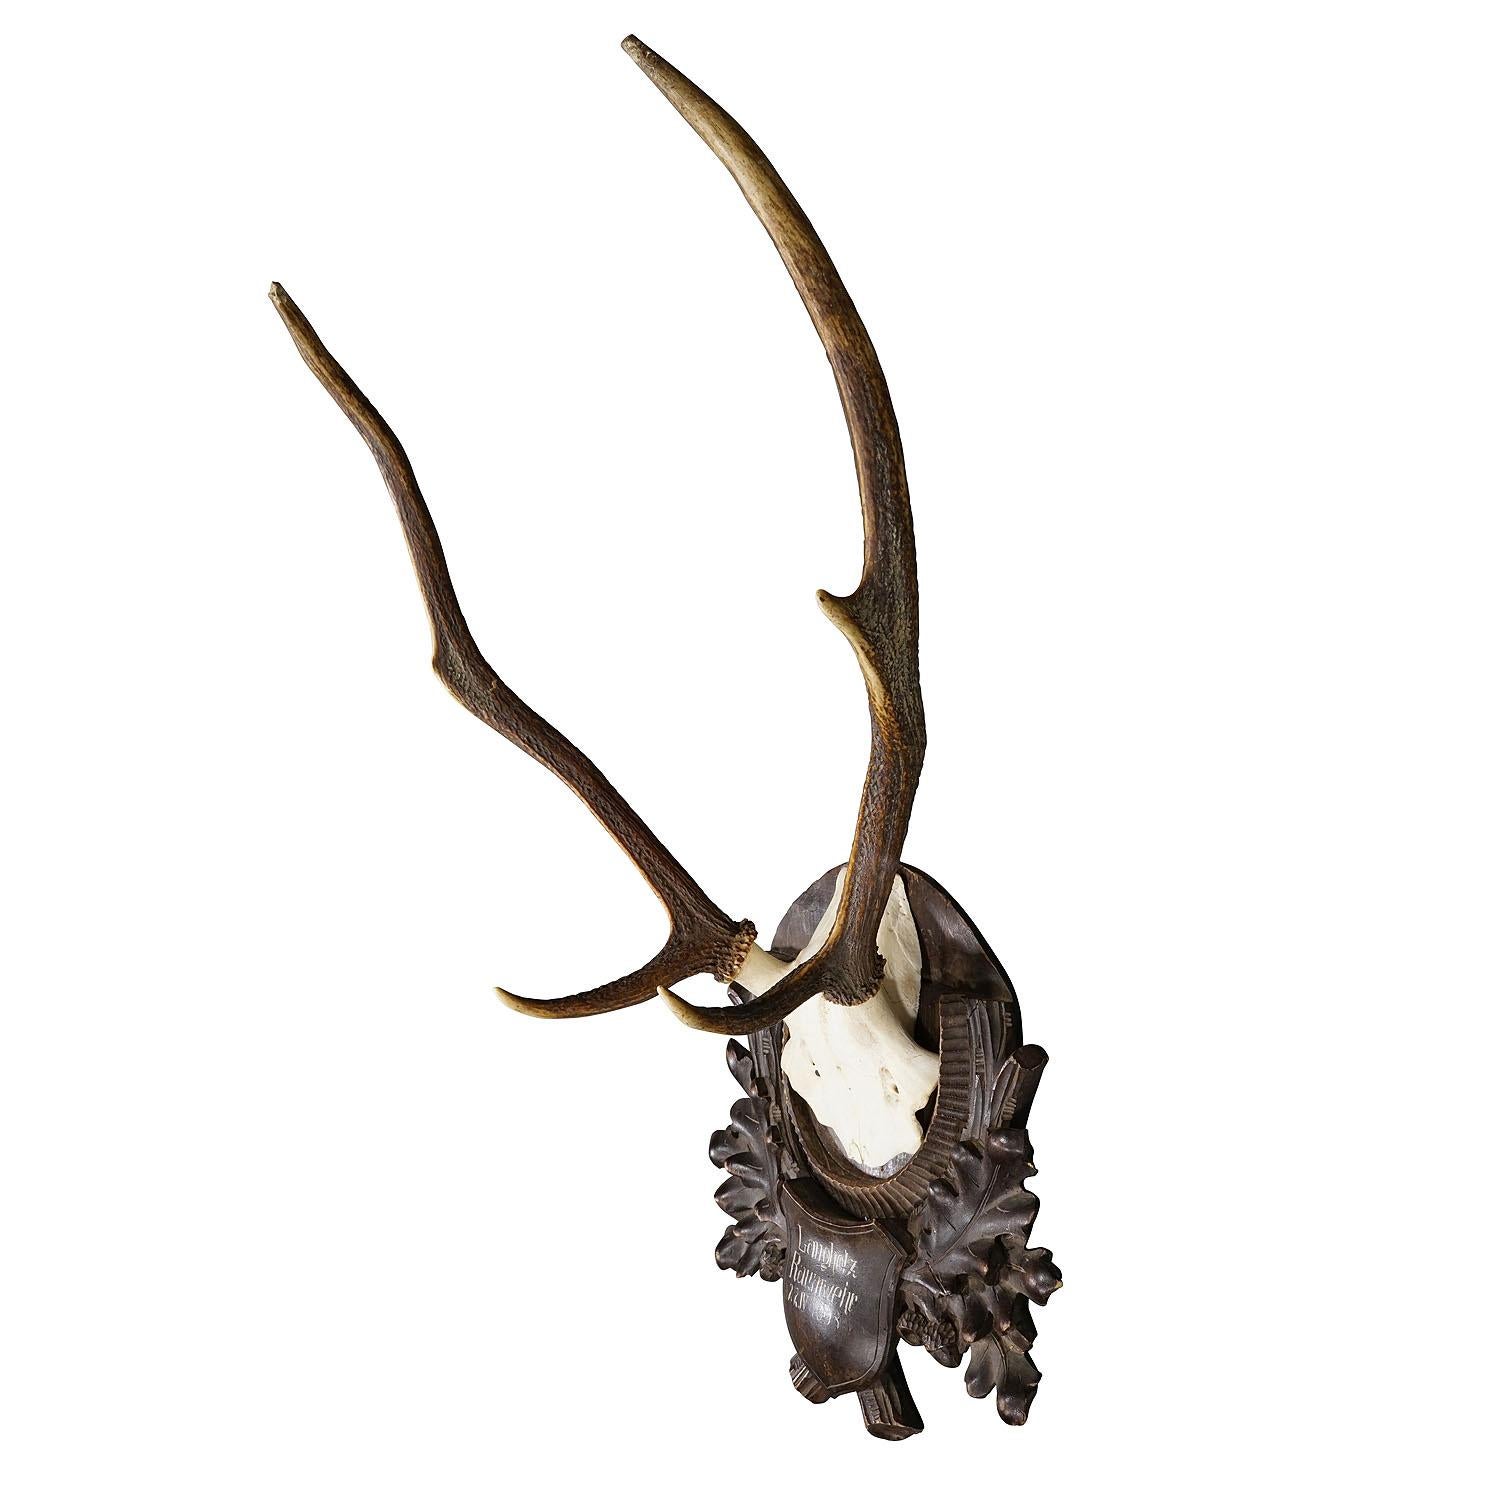 Black Forest Red Deer Trophy on Carved Wooden Plaque 1908

Antique trophy of a red deer (Cervus elaphus) from the Black Forest, hunted in 1908. The large antlers are mounted on a wood-carved plaque with a handwritten inscription stating the date and